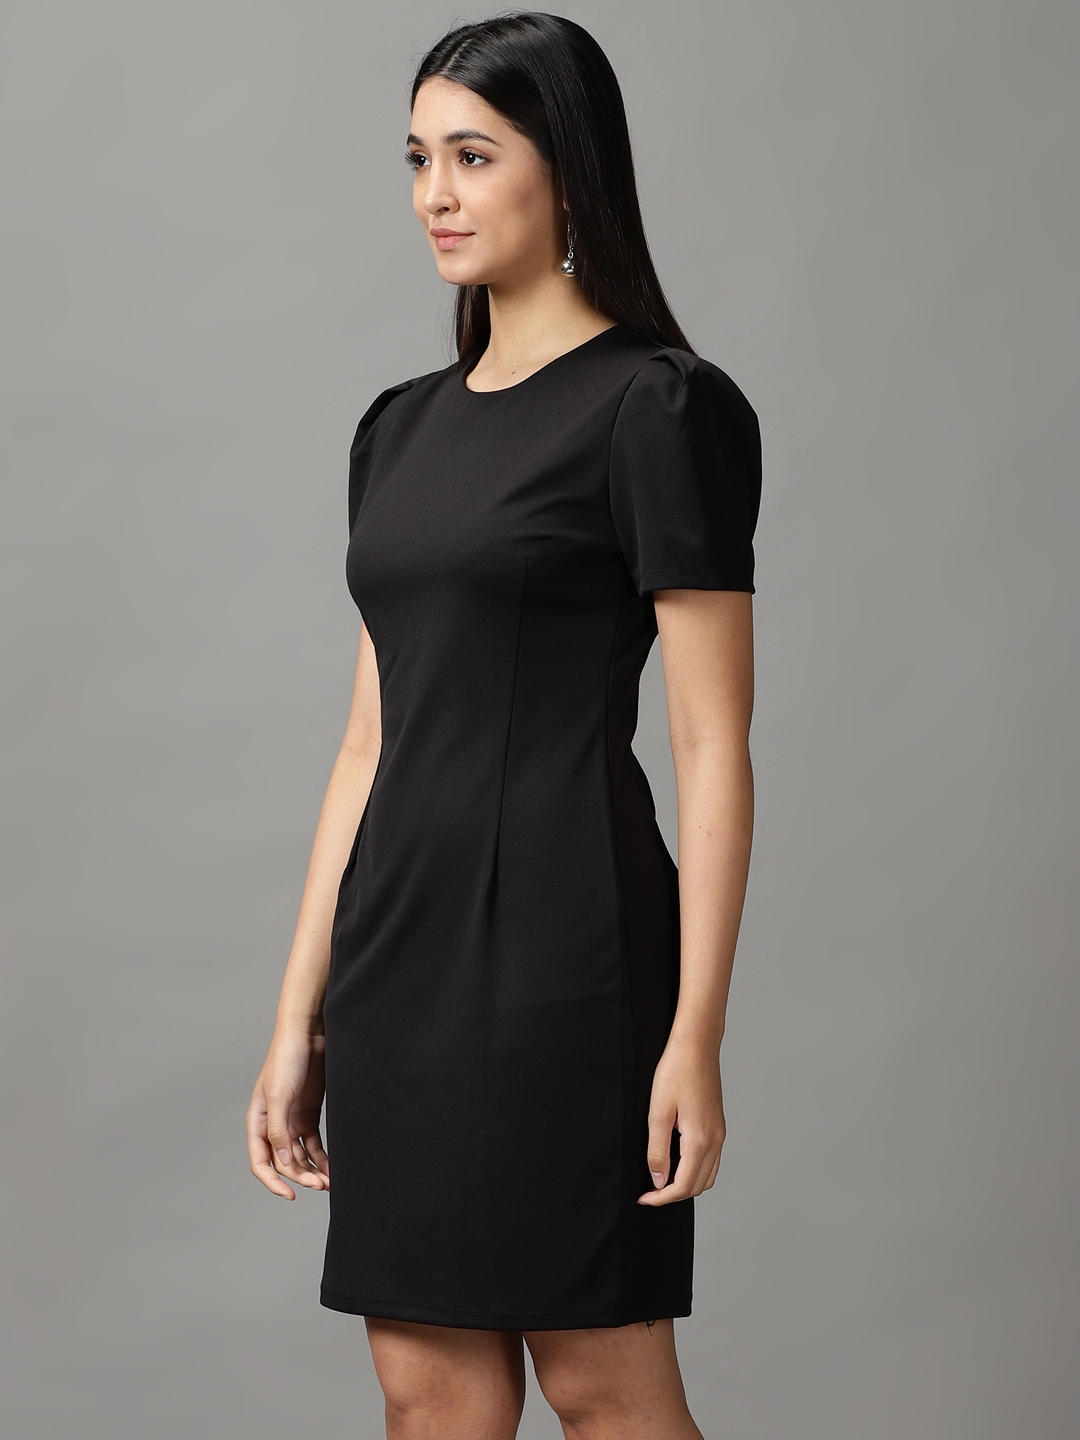 Showoff | SHOWOFF Women Black Solid Round Neck Short Sleeves Above Knee Bodycon Dress 2